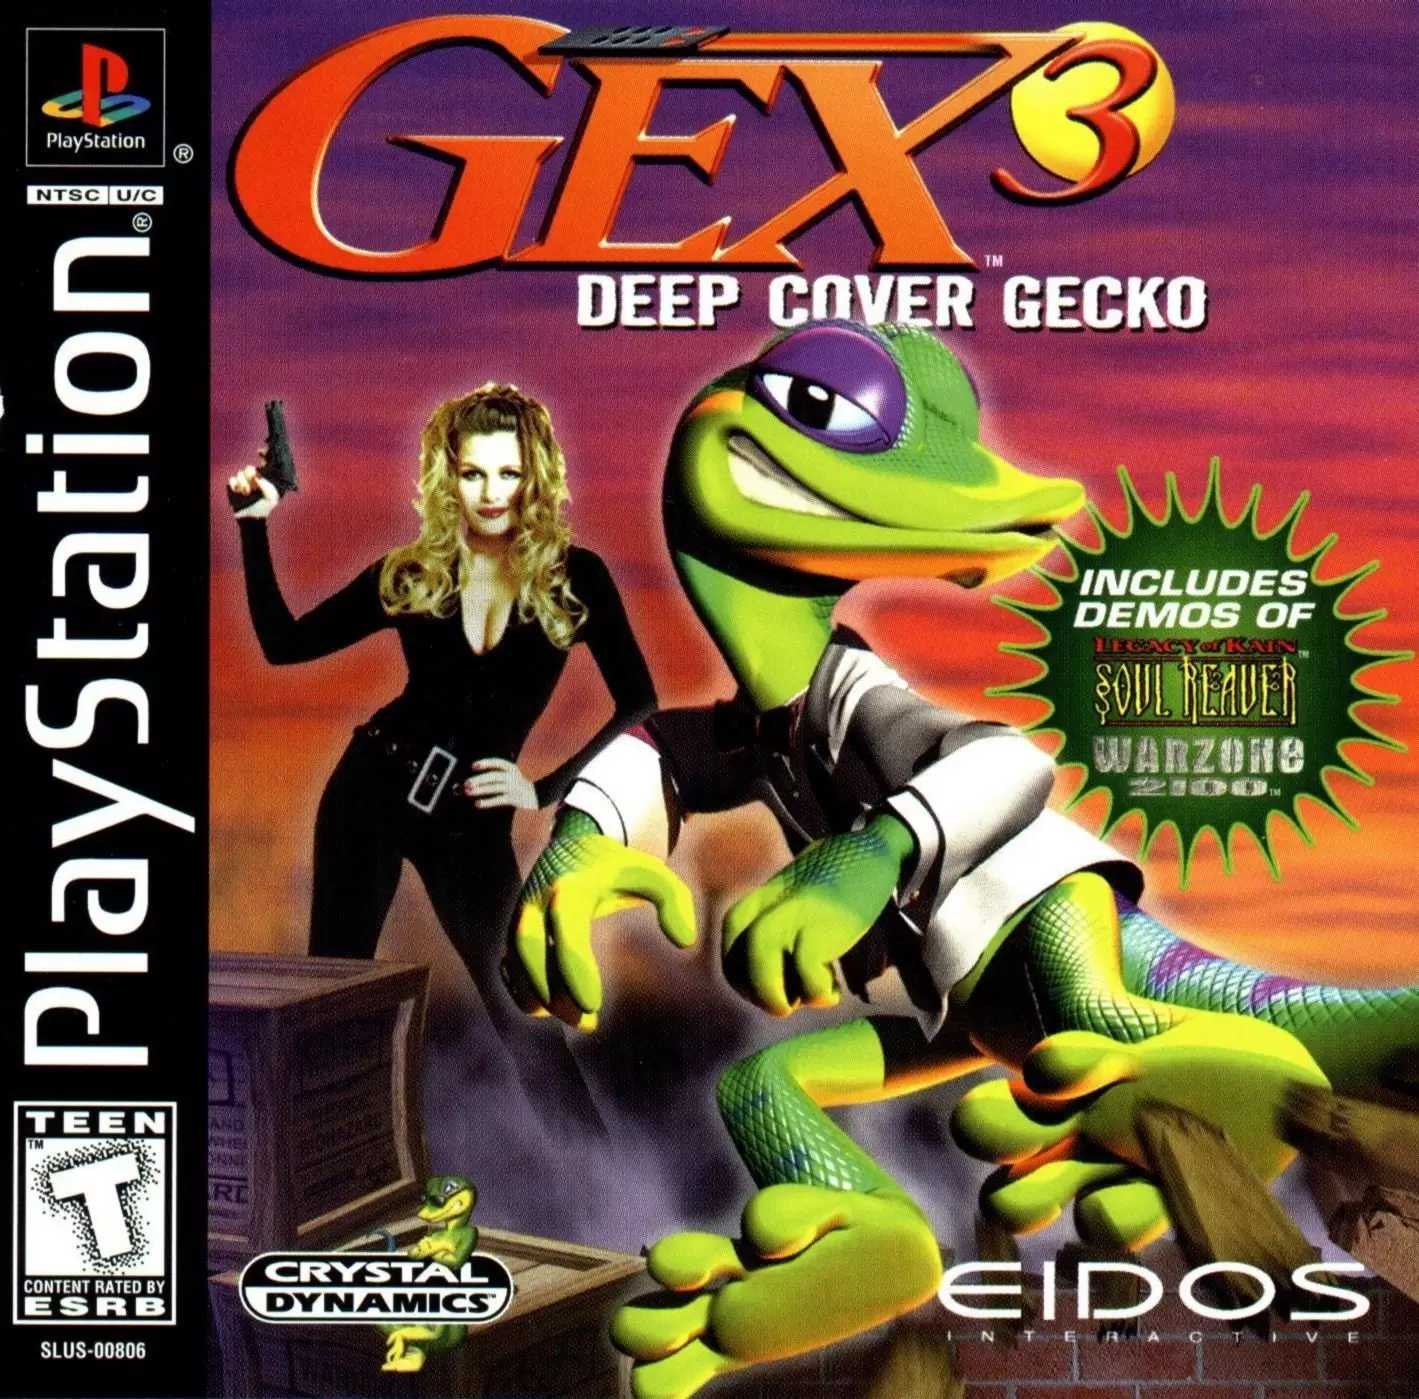 Playstation games - Gex 3: Deep Cover Gecko